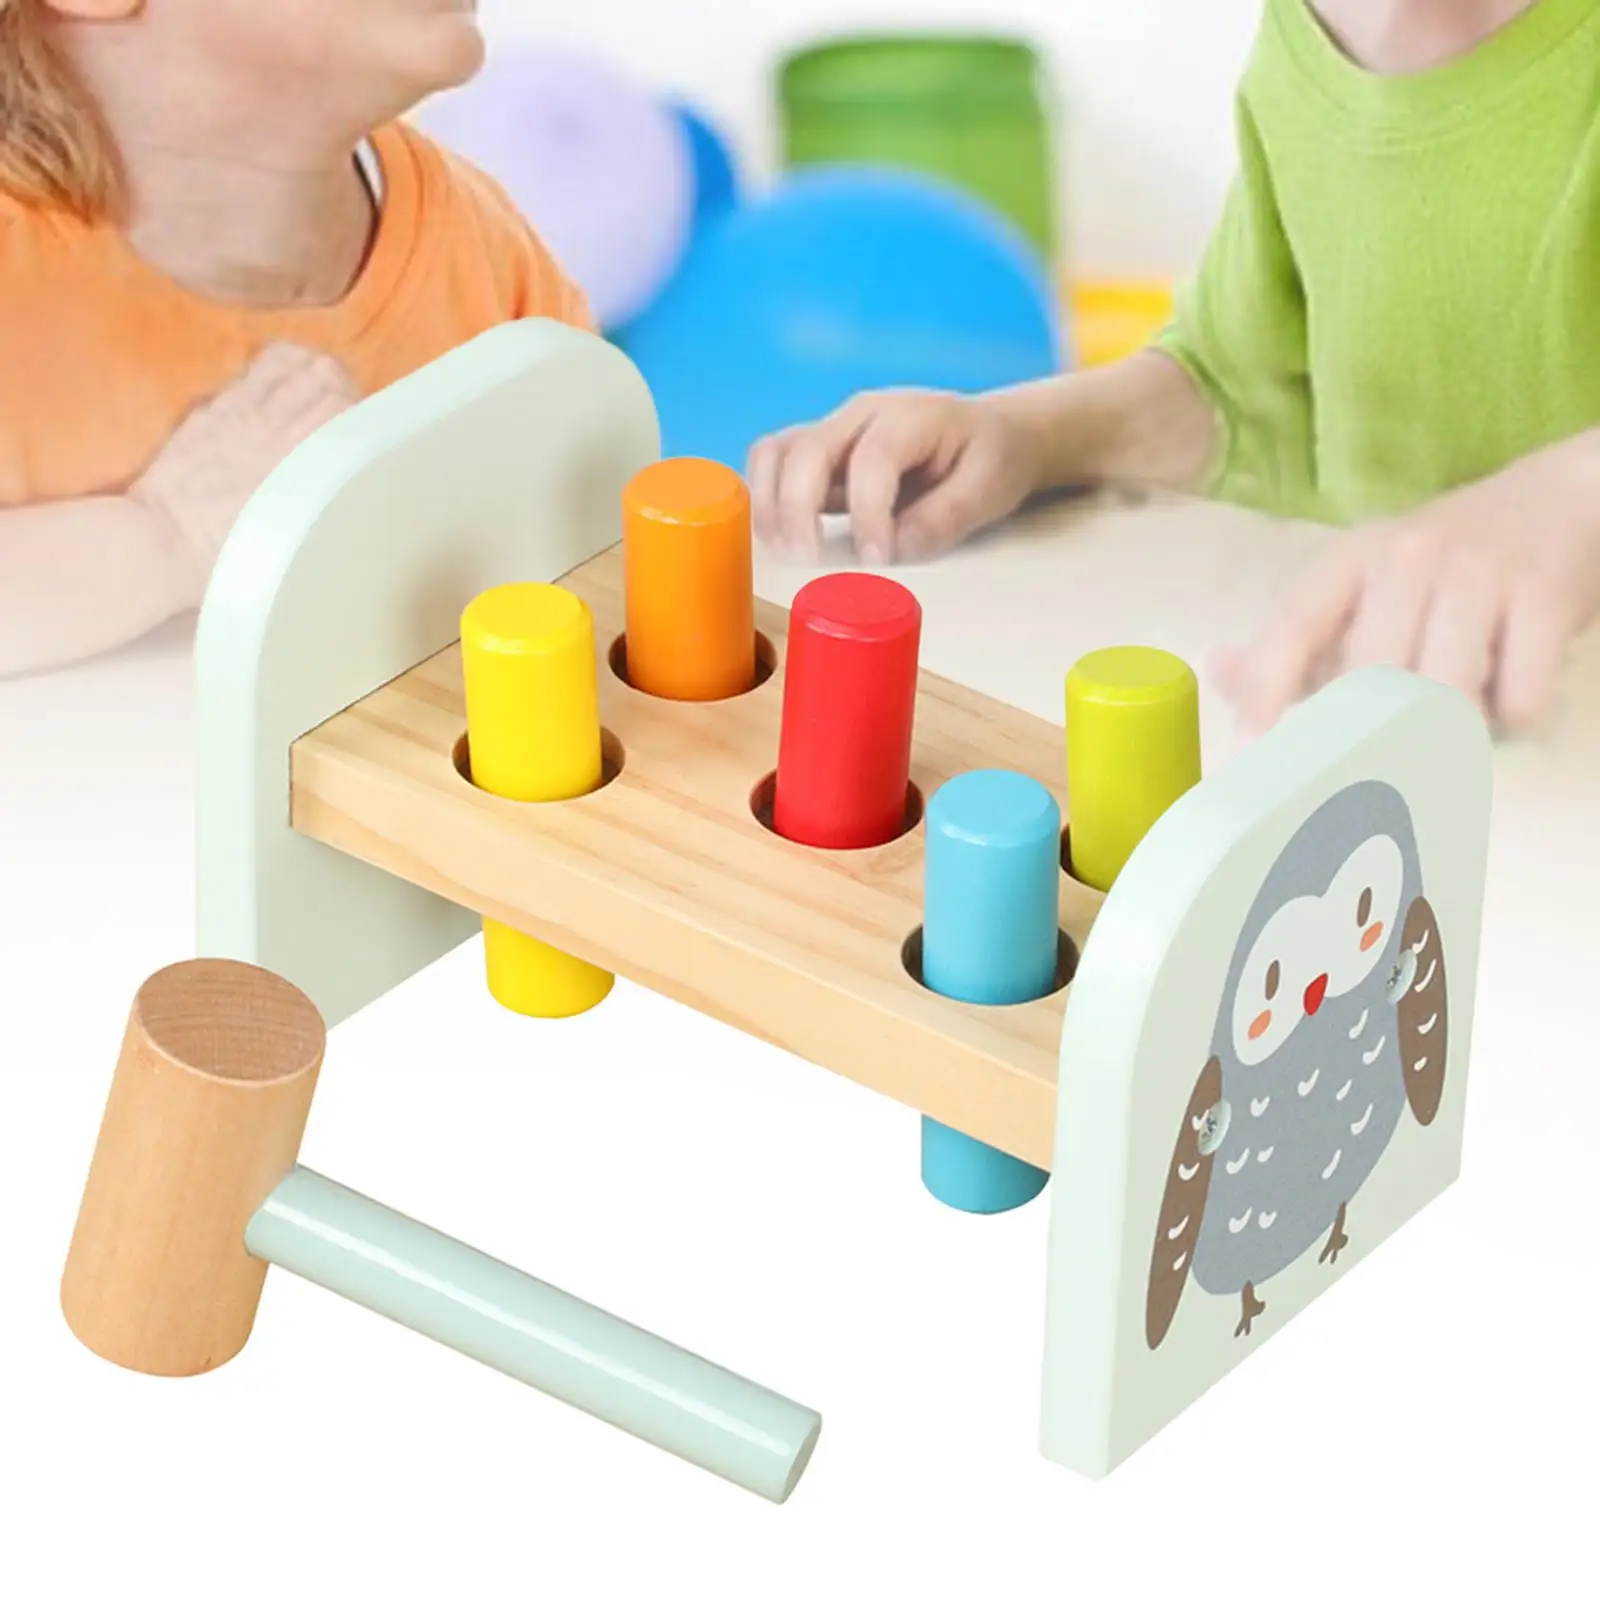 Pounding Bench Wood Toy Early Learning Fine Motor Skills Wooden Pounding Bench for Birthday Gift Party Favors Kids Boys Girls